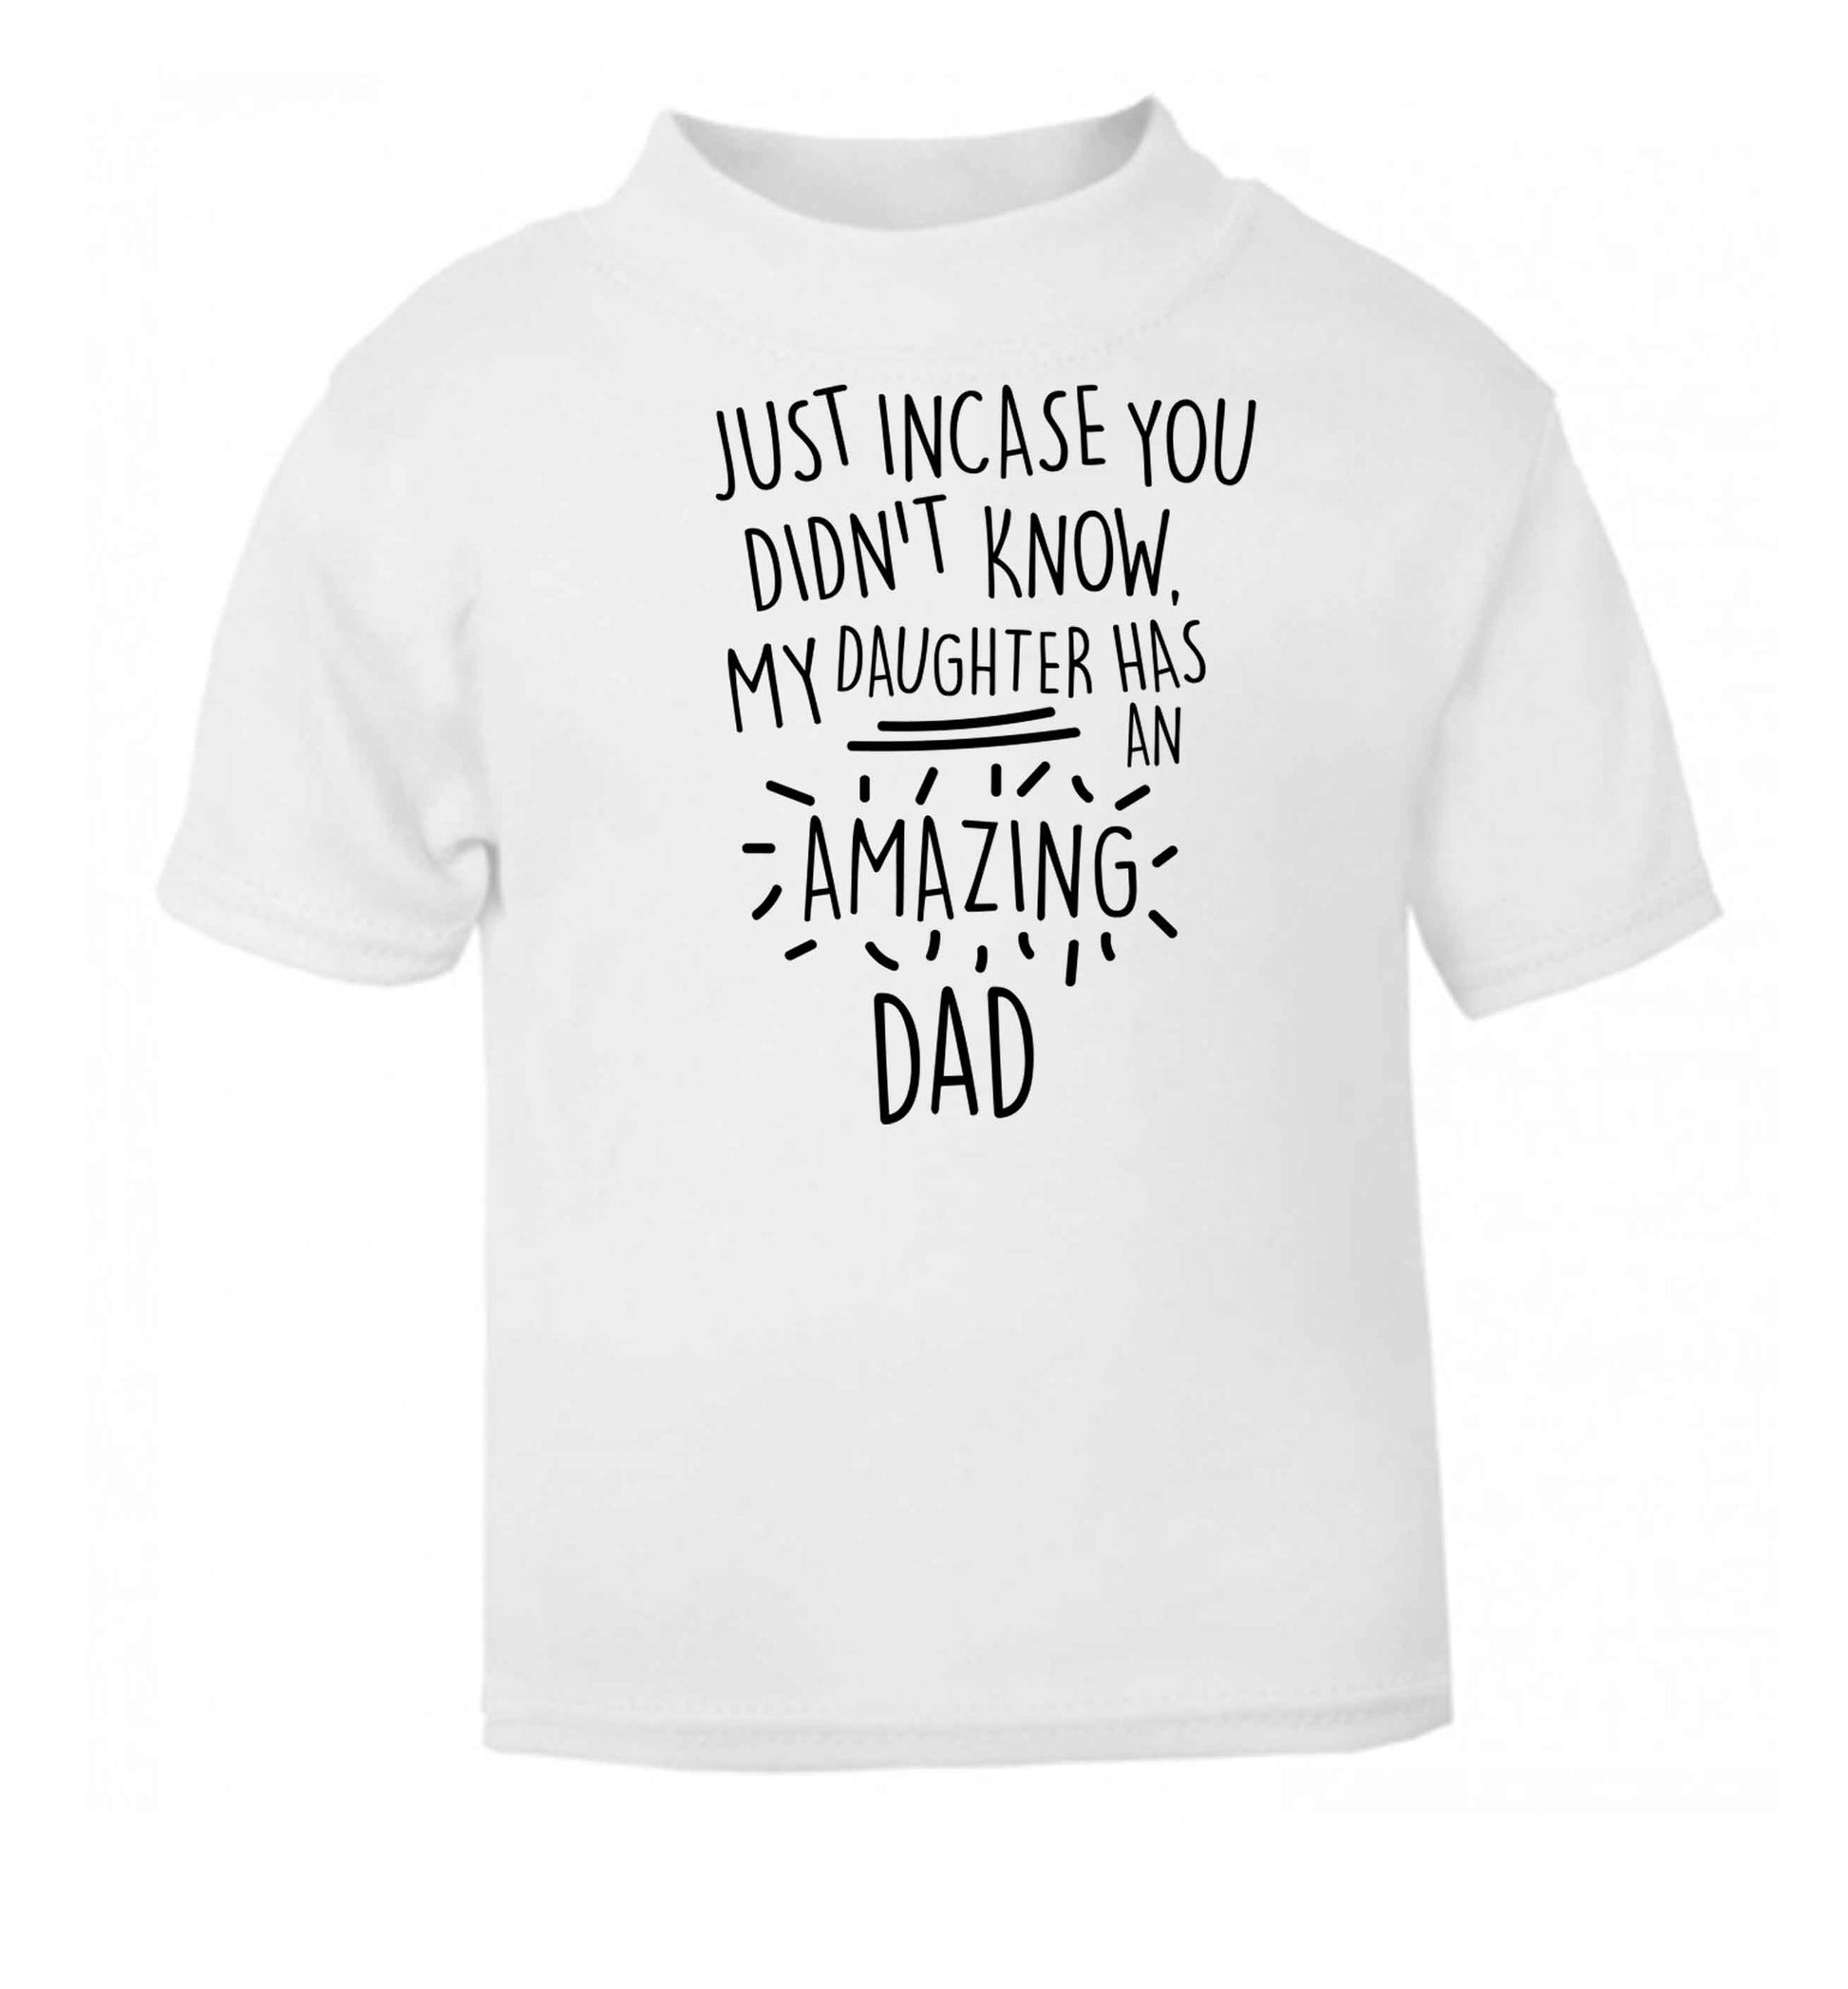 Just incase you didn't know my daughter has an amazing dad white baby toddler Tshirt 2 Years